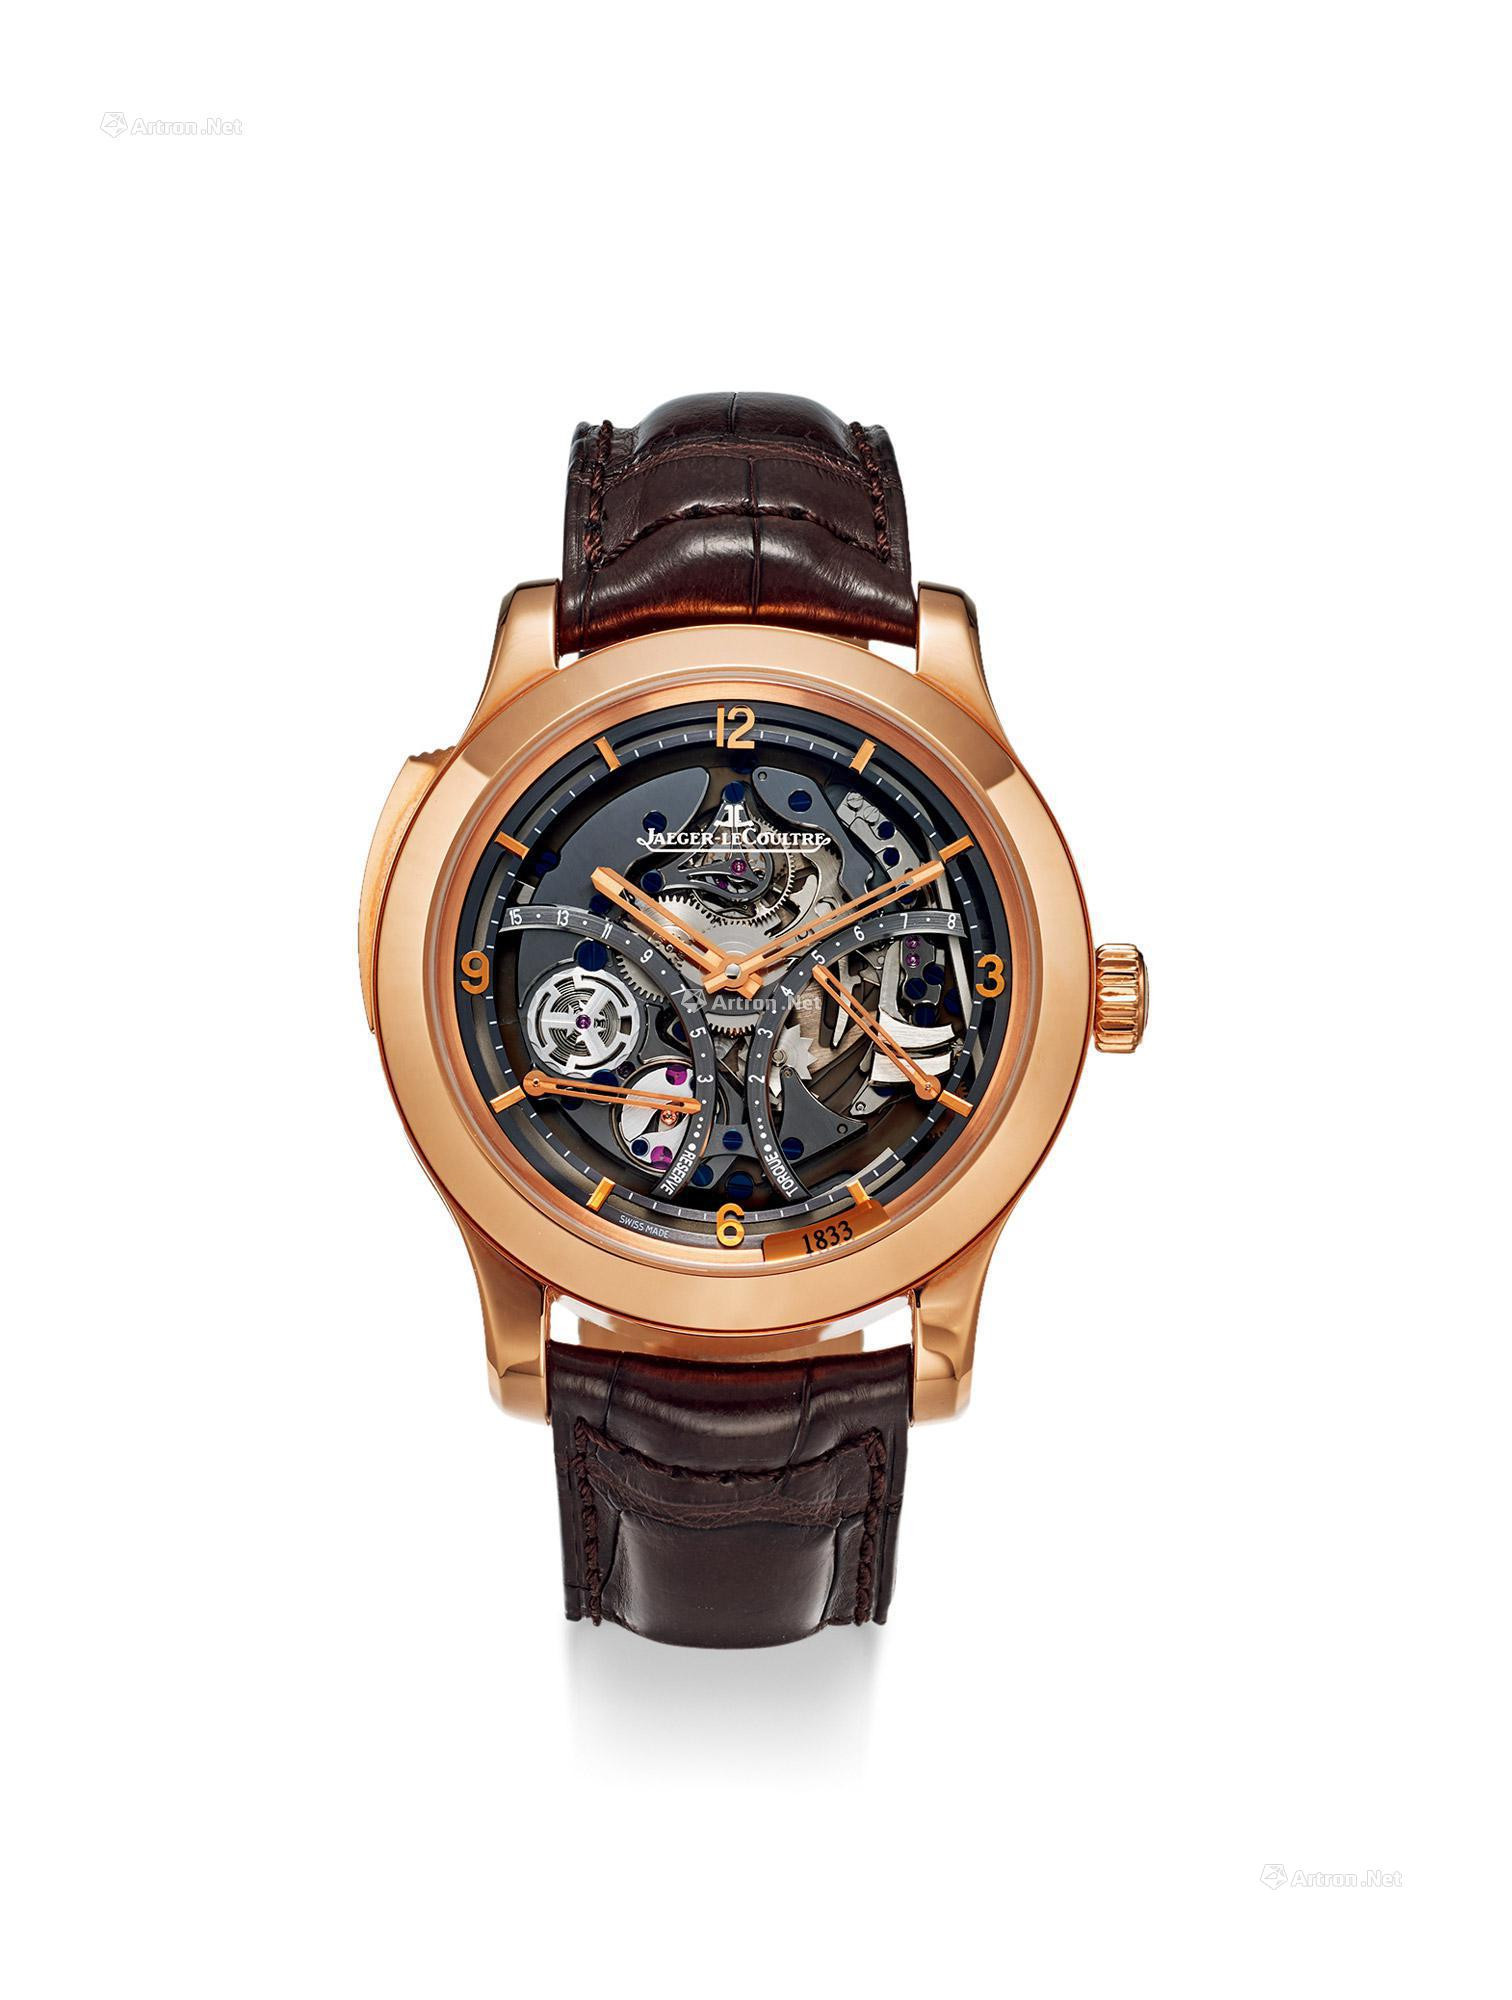 JAEGER-LECOULTRE  A VERY FINE LIMITED EDITION ROSE GOLD SKELETONIZED MINUTE REPEATING MECHANICAL WRISTWATCH， WITH POWER RESERVE AND BARREL TORQUE INDICATORS， CERTIFICATE OF ORIGIN AND PRESENTATION BOX